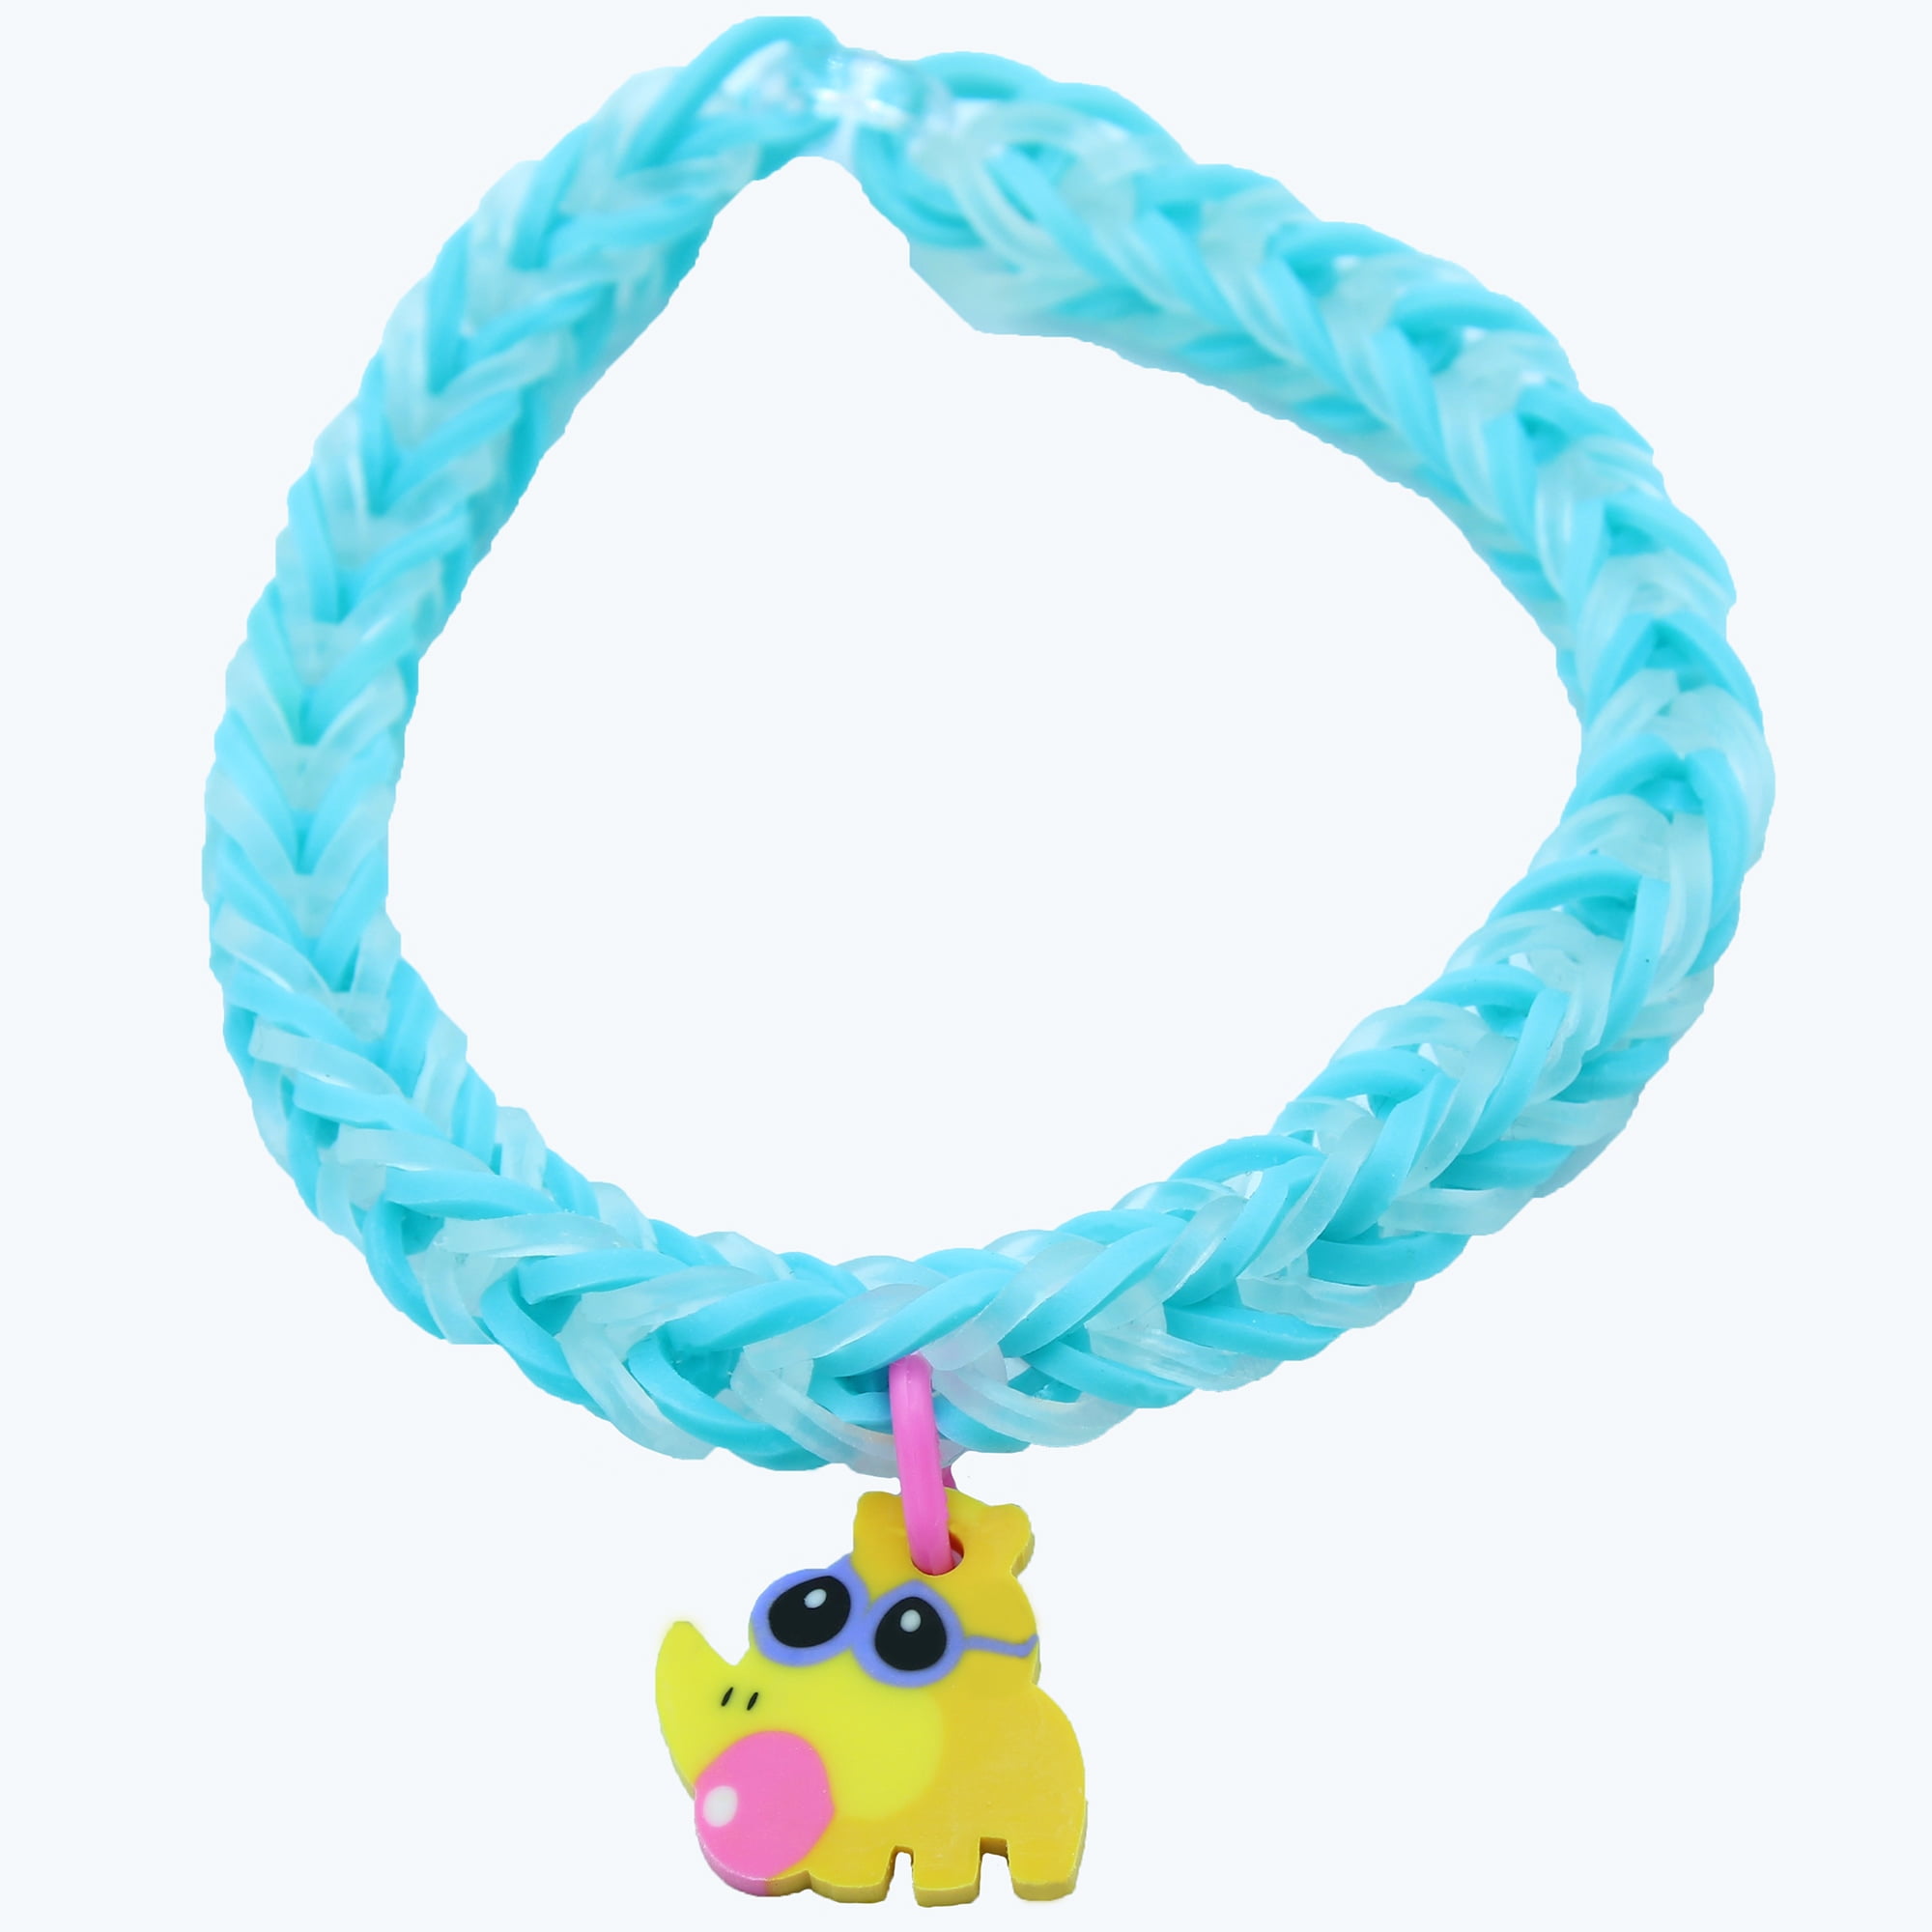  Rainbow Loom® Loomi-Pals™ Mini Combo Set, Features 60 Cute  Assorted Loomi-Pals Charms,1 Happy Loom, 2100 Colorful Bands All in a  Carrying Case for Boys and Girls 7+